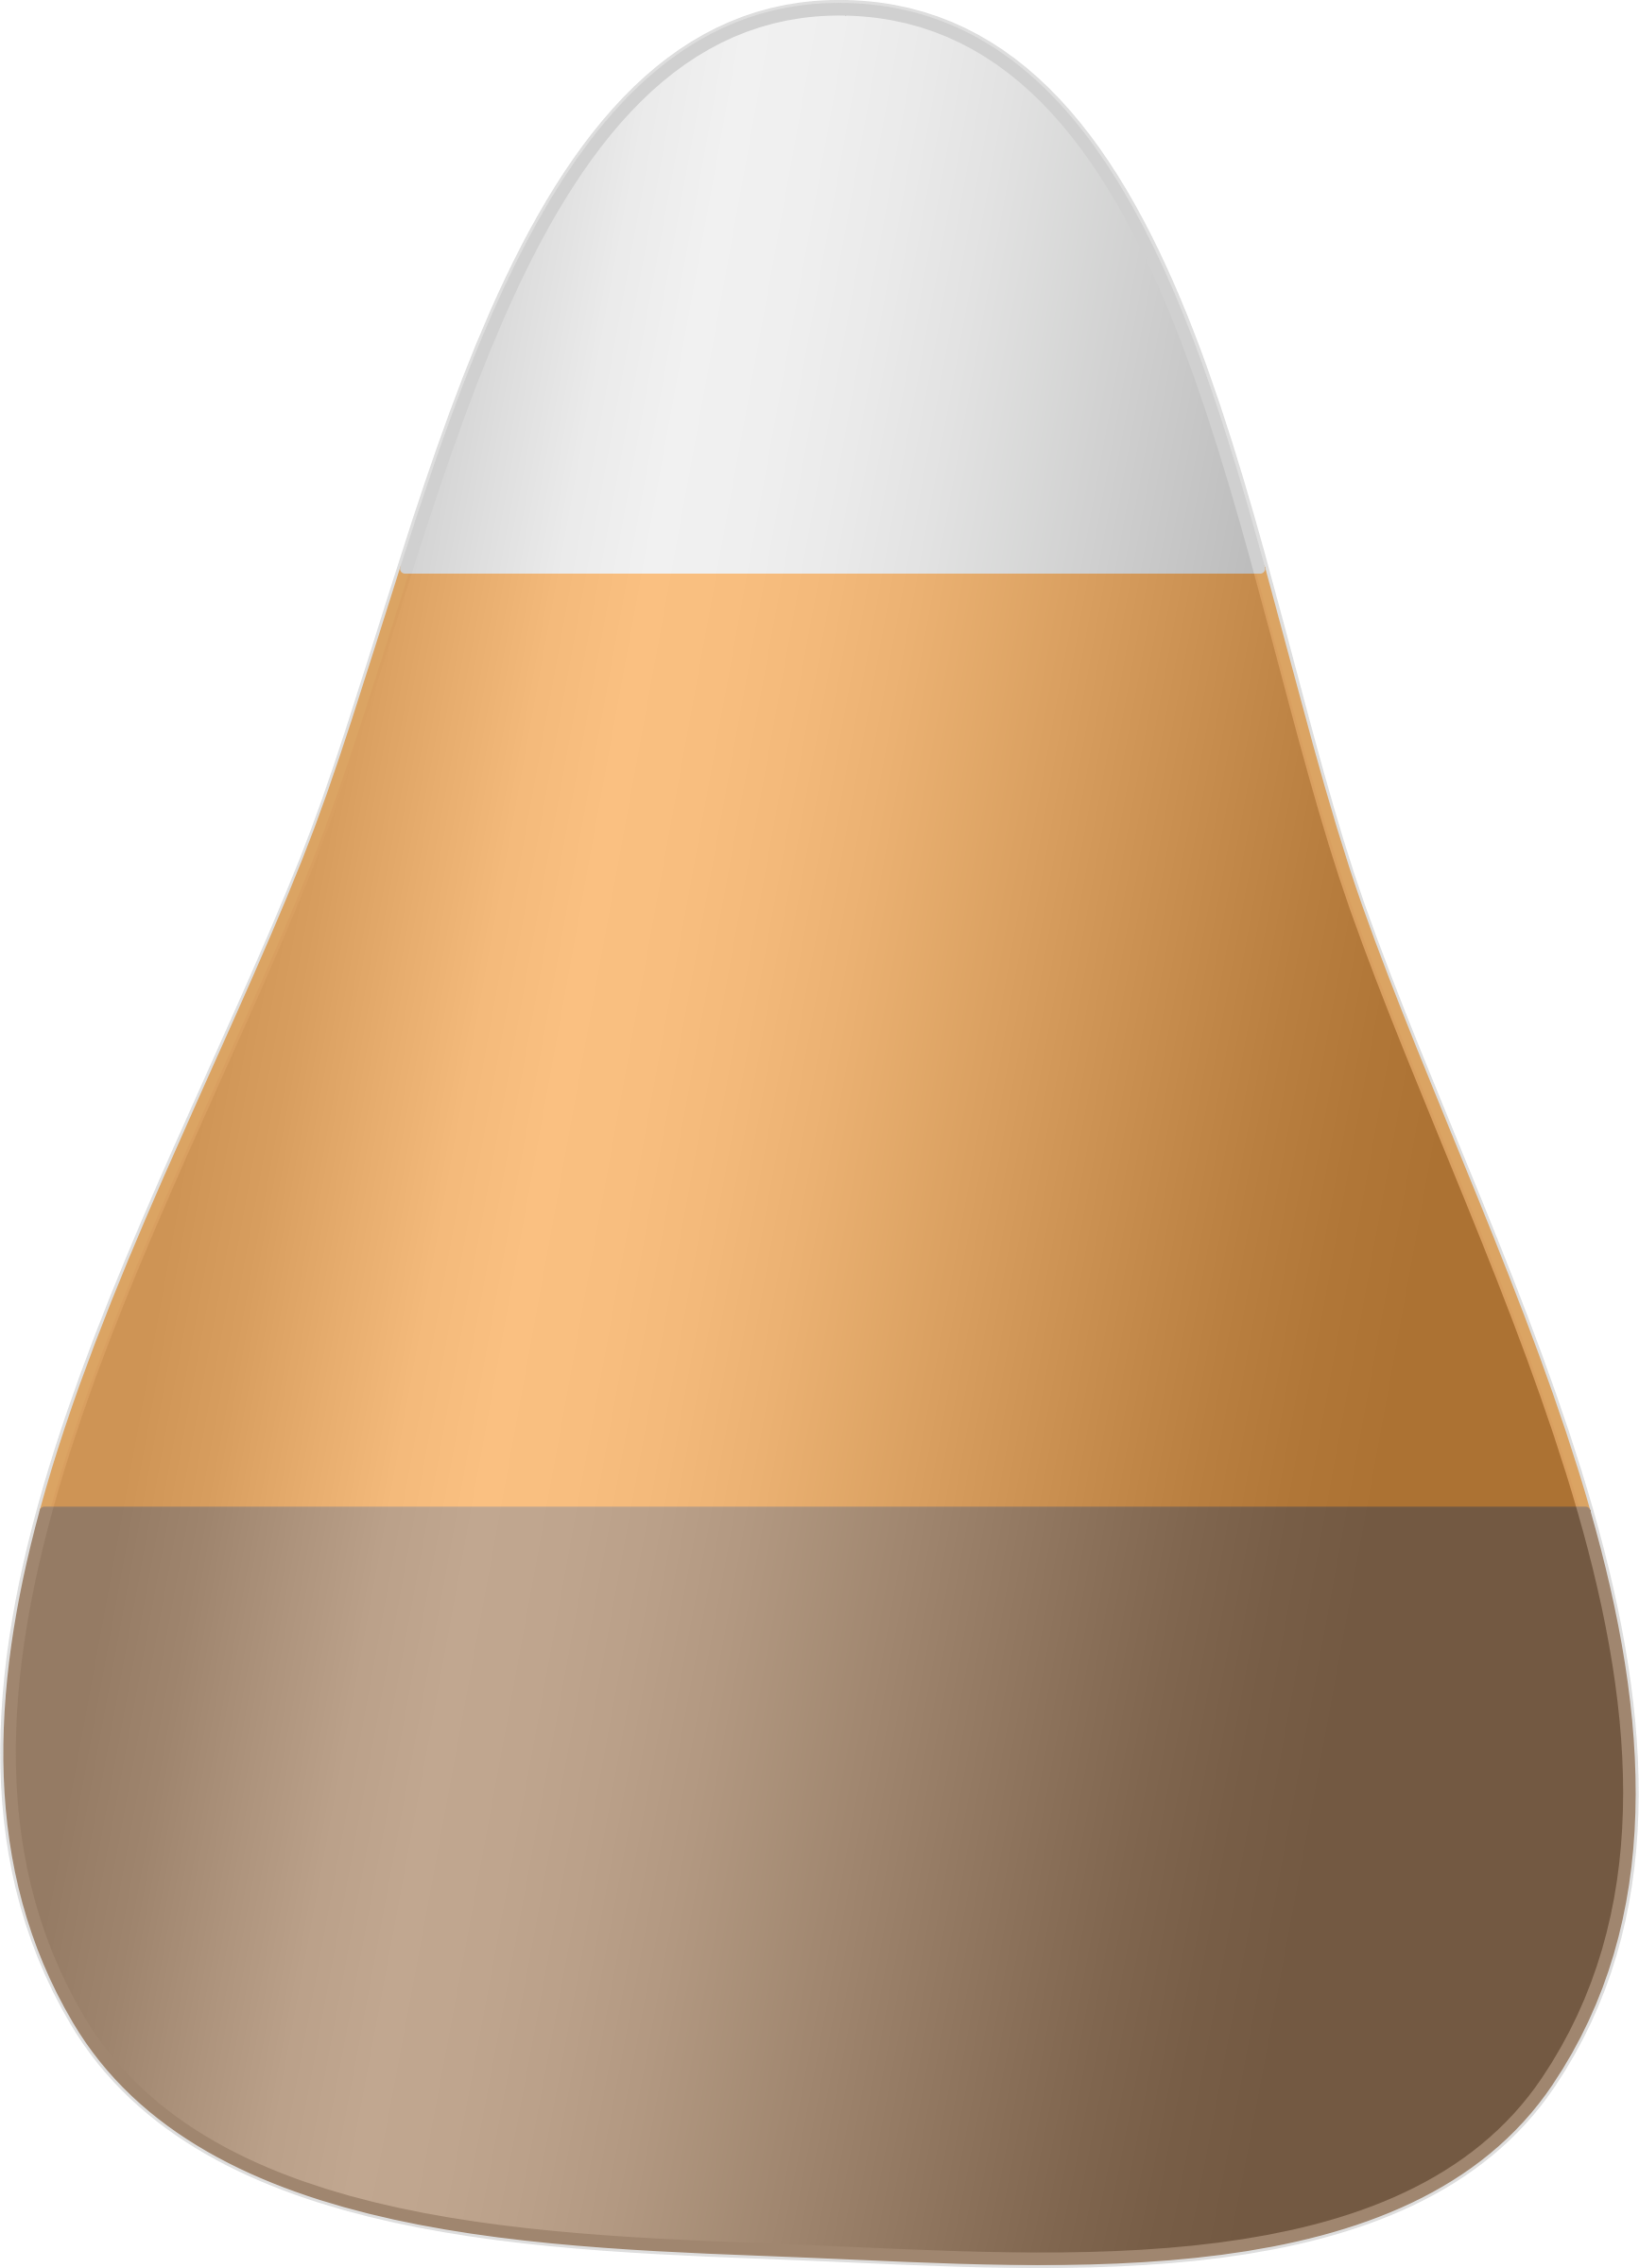 This Free Icons Png Design Of Candy Corn 03 - Brown Candy Corn Clipart Transparent Png (1734x2400), Png Download